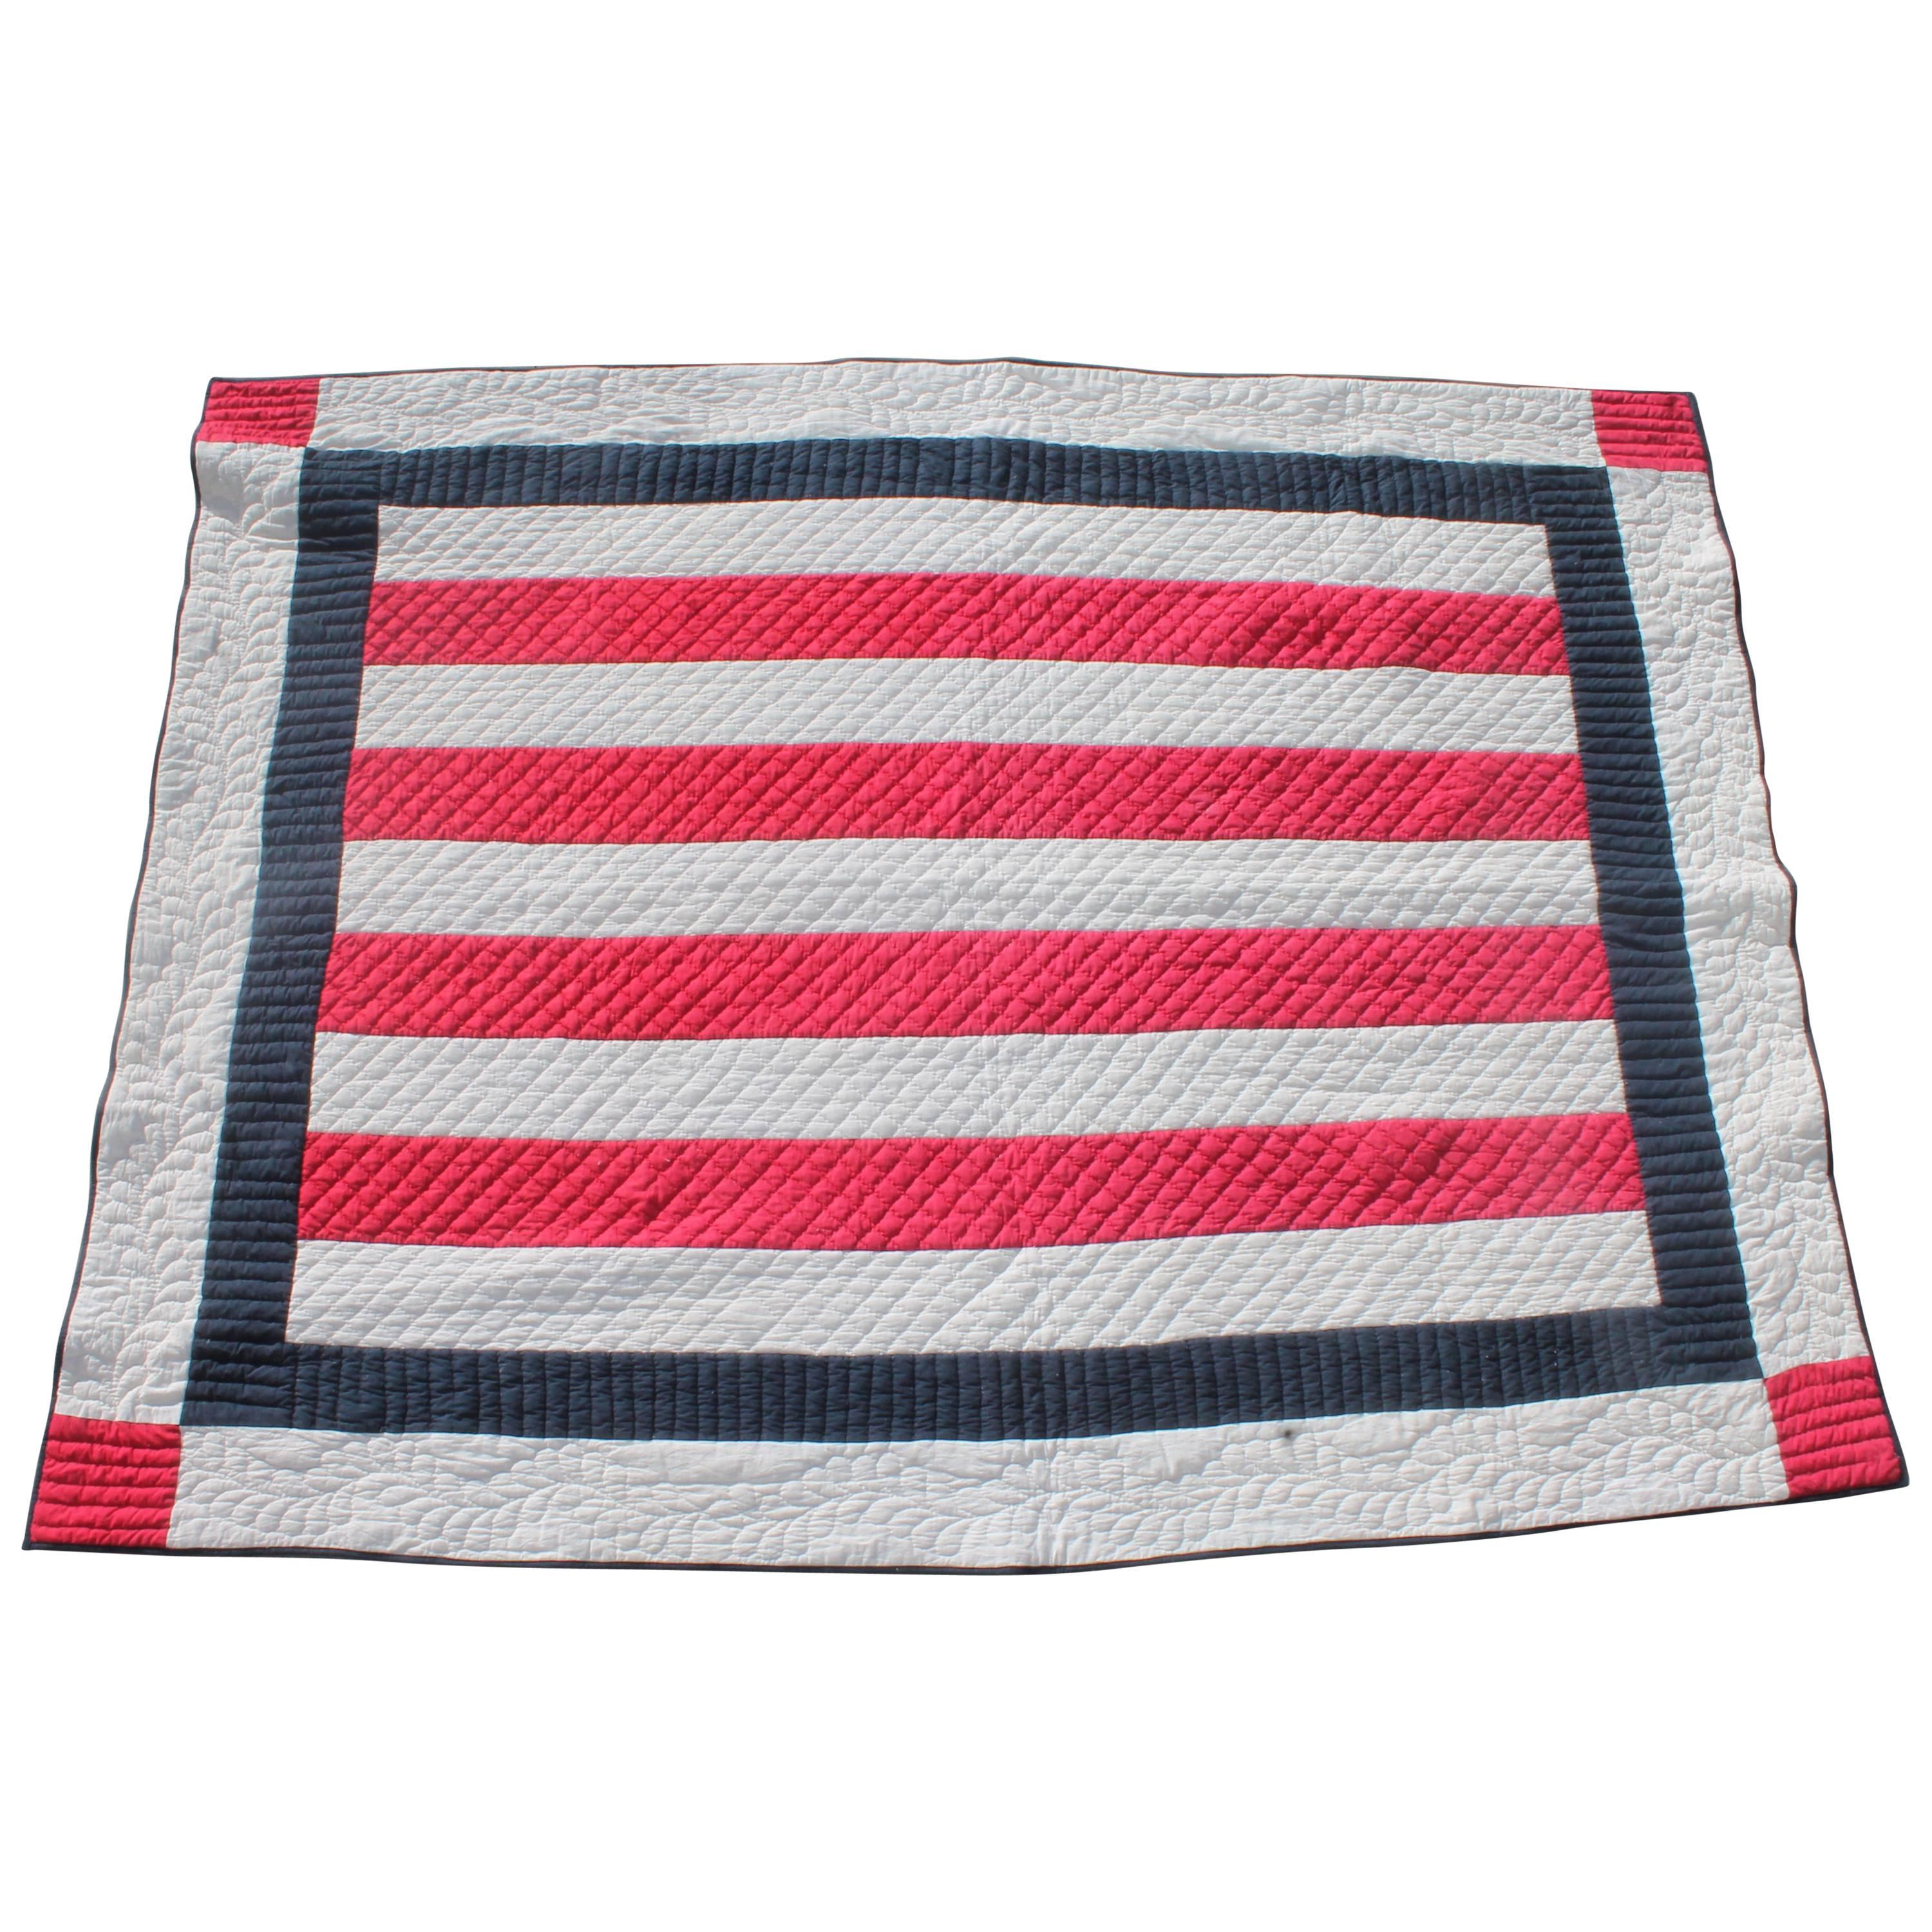 Patriotic Red, White and Blue Bars Quilt